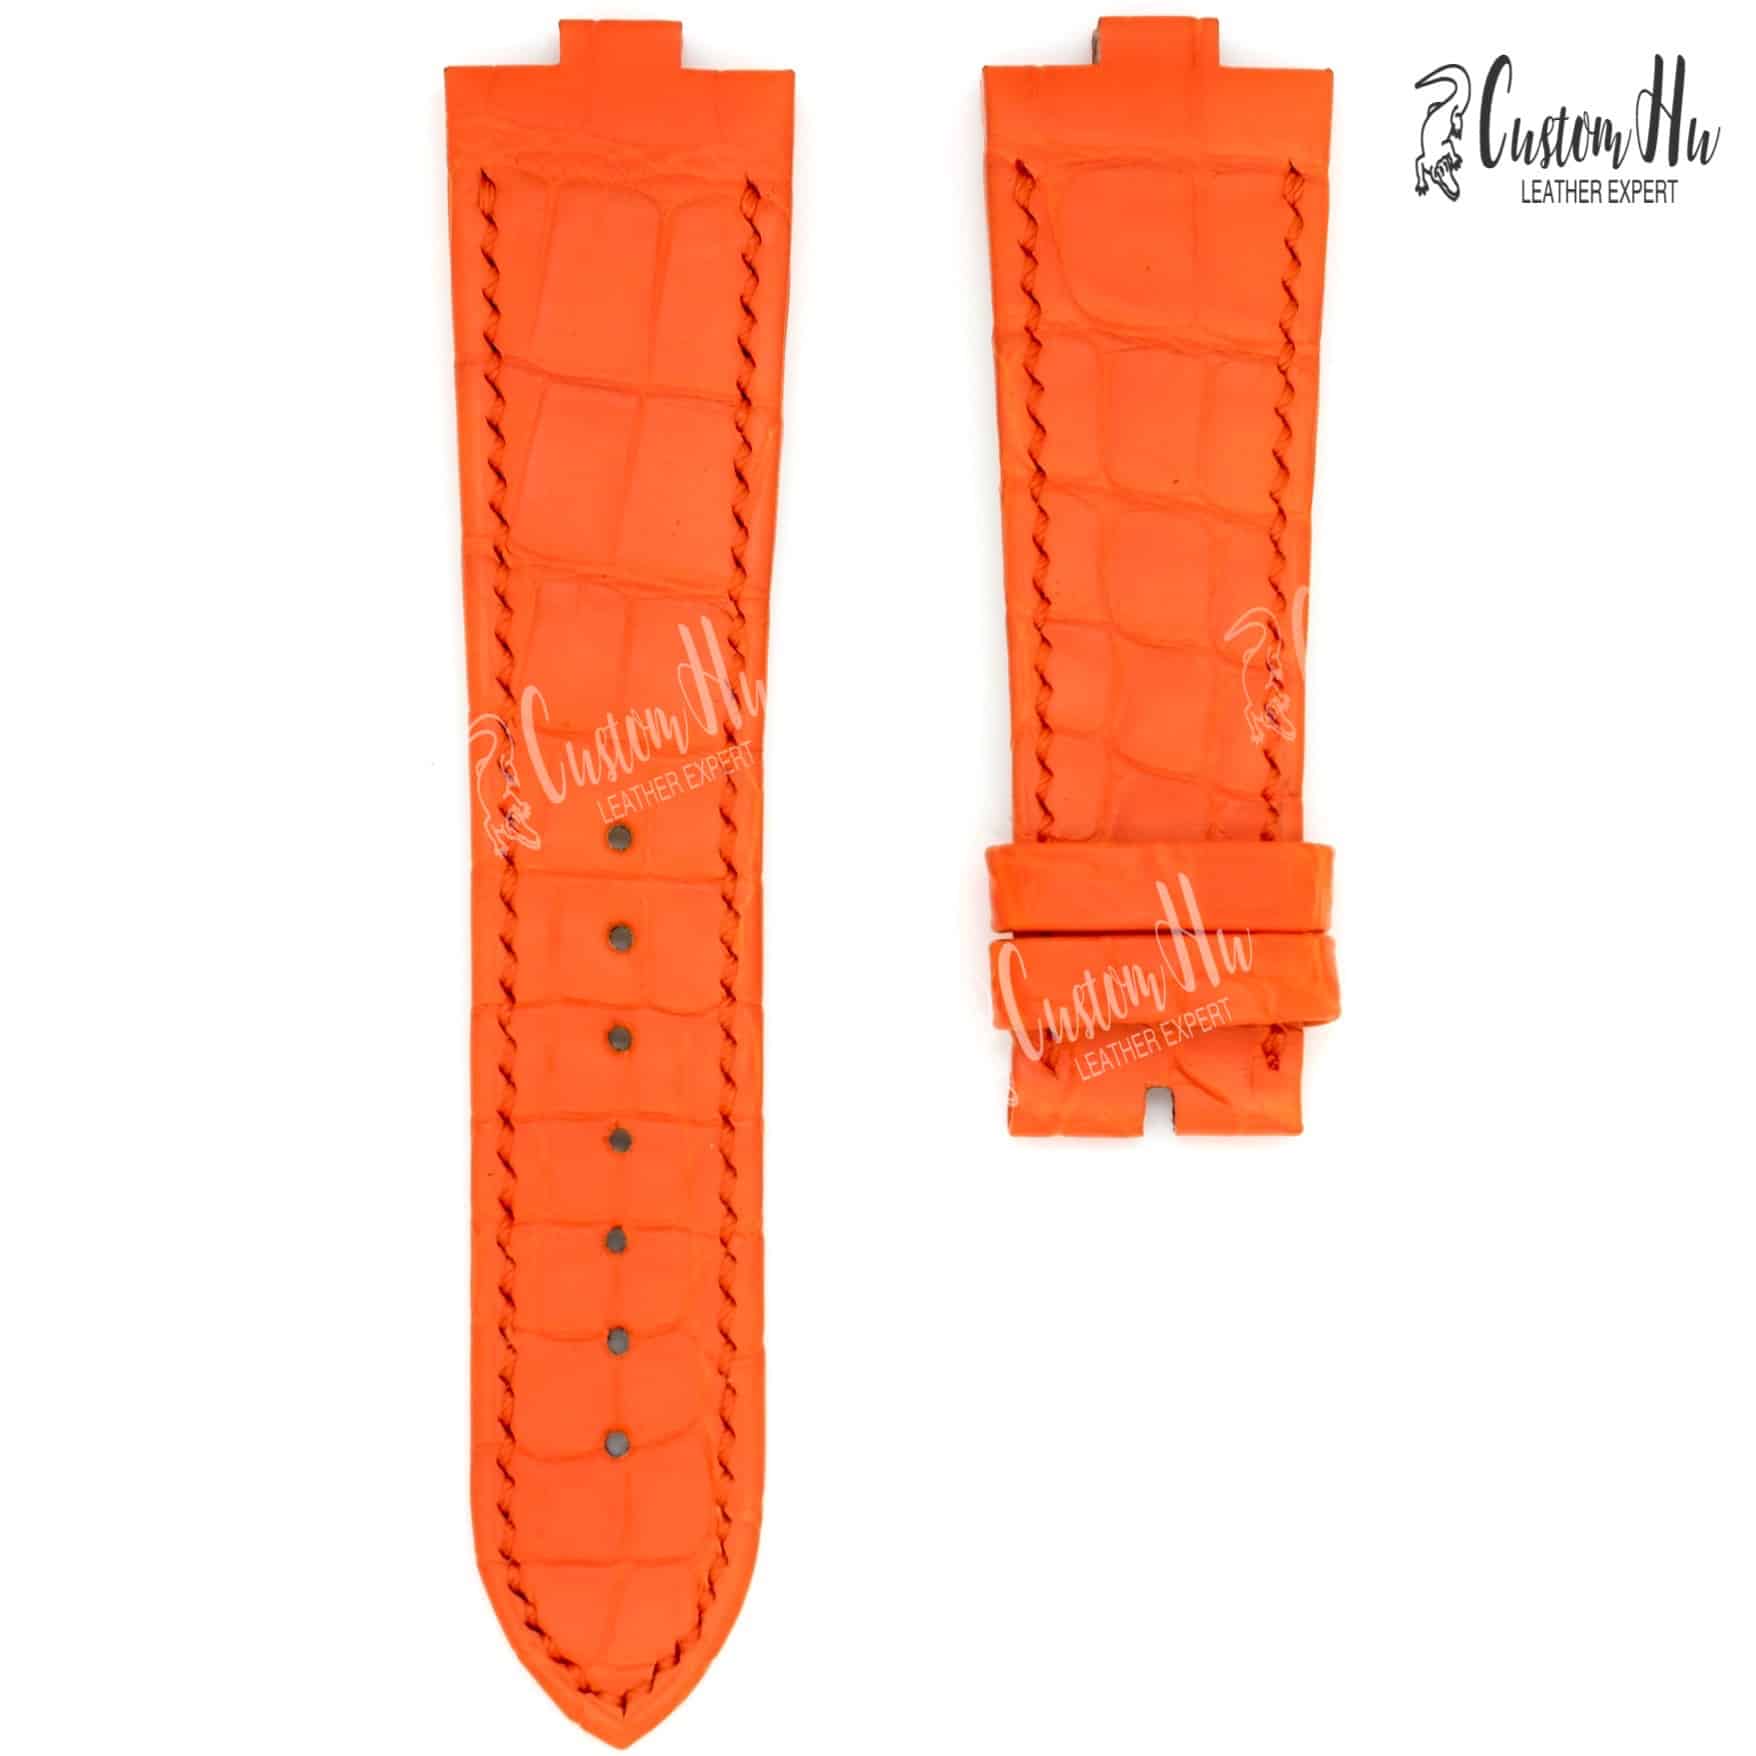 leather strap Compatible with Vacheron Constantin Overseas Custom watch strap Support any style and color customhu